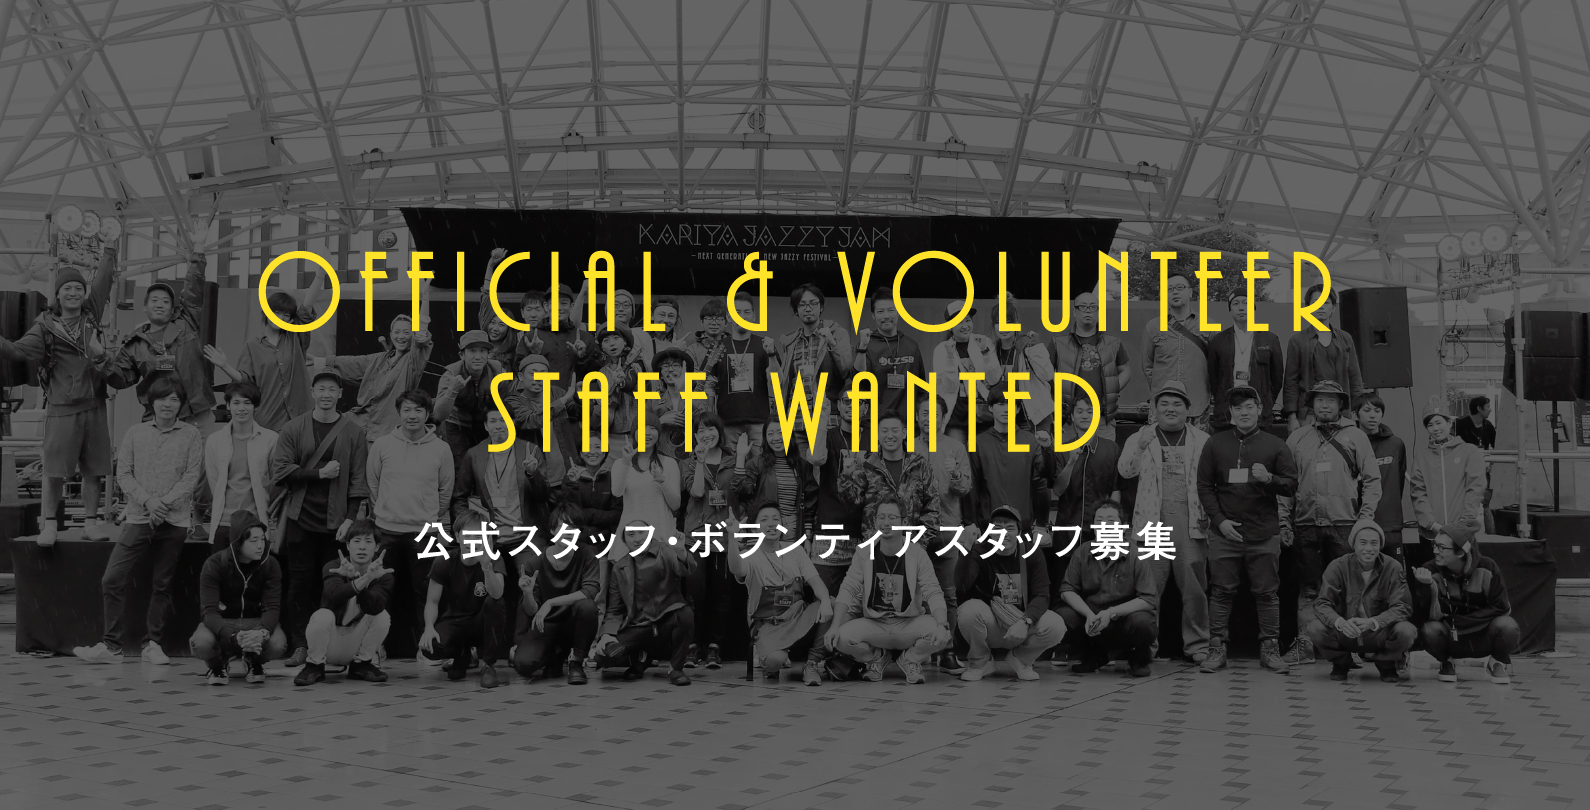 OFFICIAL & VOLUNTEER STAF WANTED